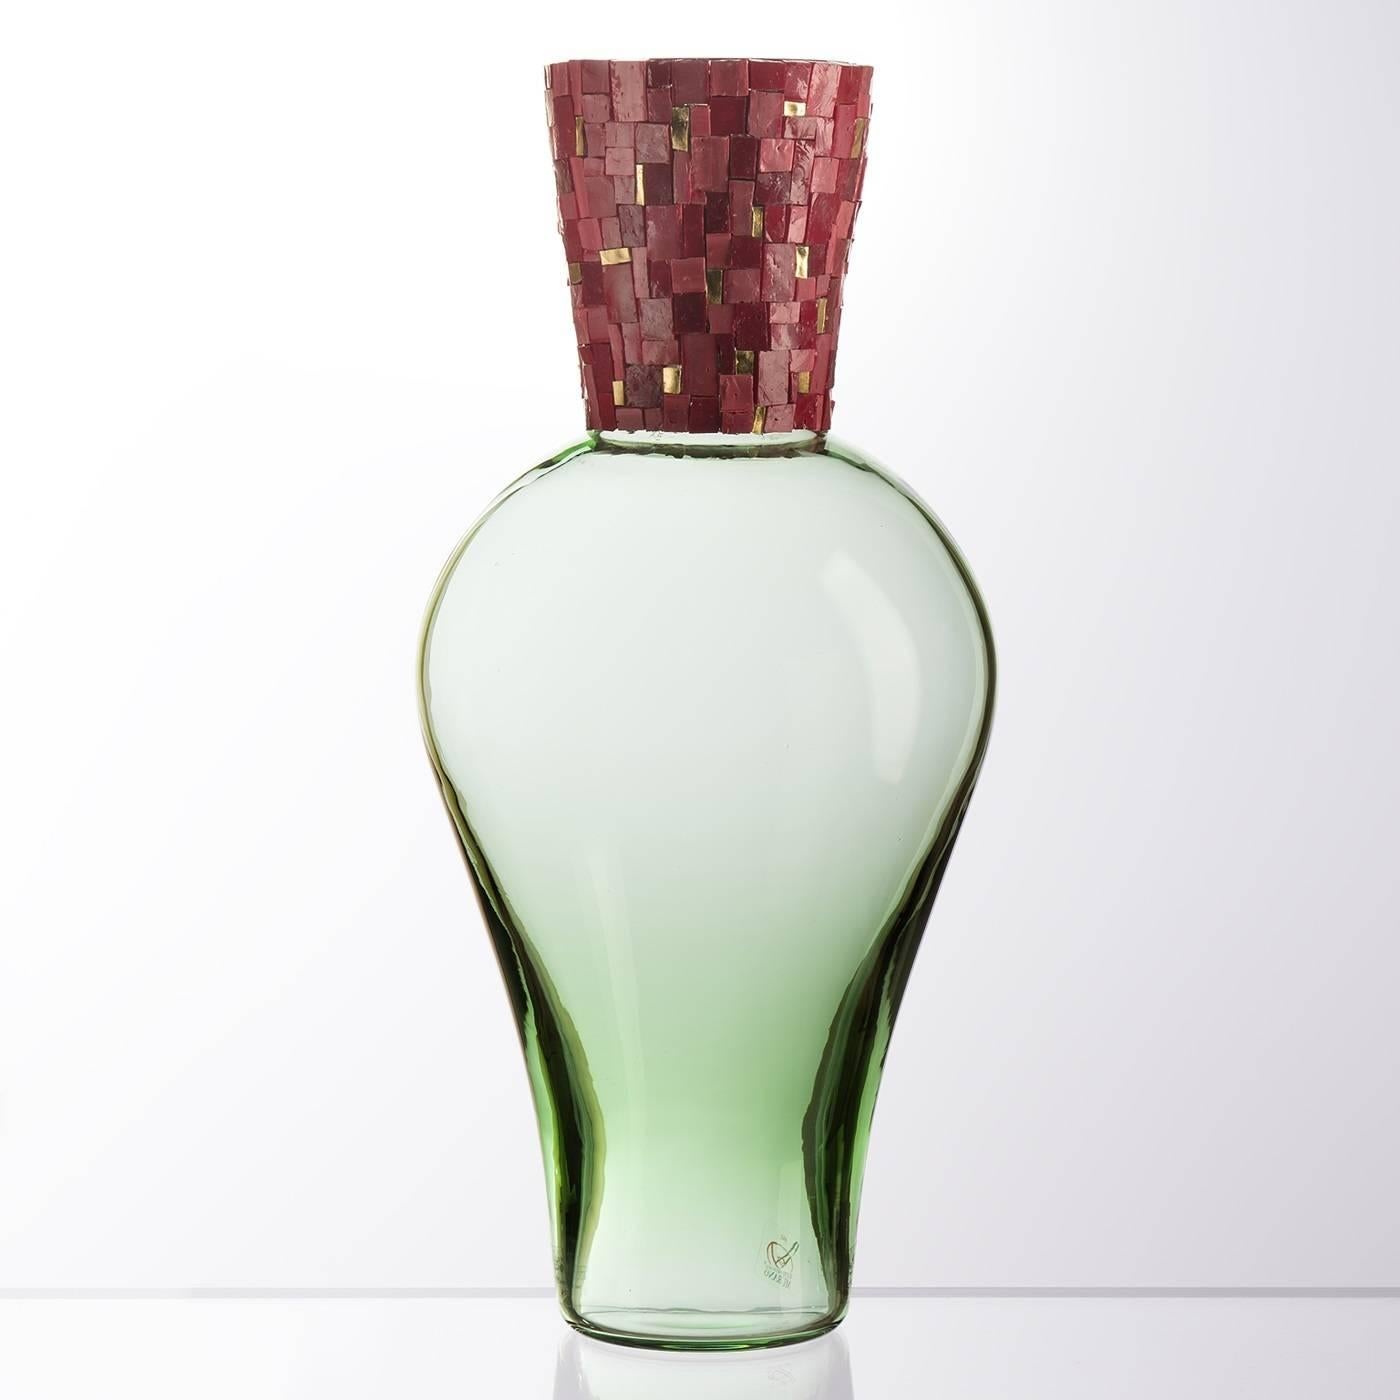 Elegant and unique, this breathtaking Murano mouth-blown glass vase is a perfect piece to brighten any interior thanks to the graceful mosaic band that adorns its neck. The Amphora-shape body is made of Murano glass in a delicate green shade that